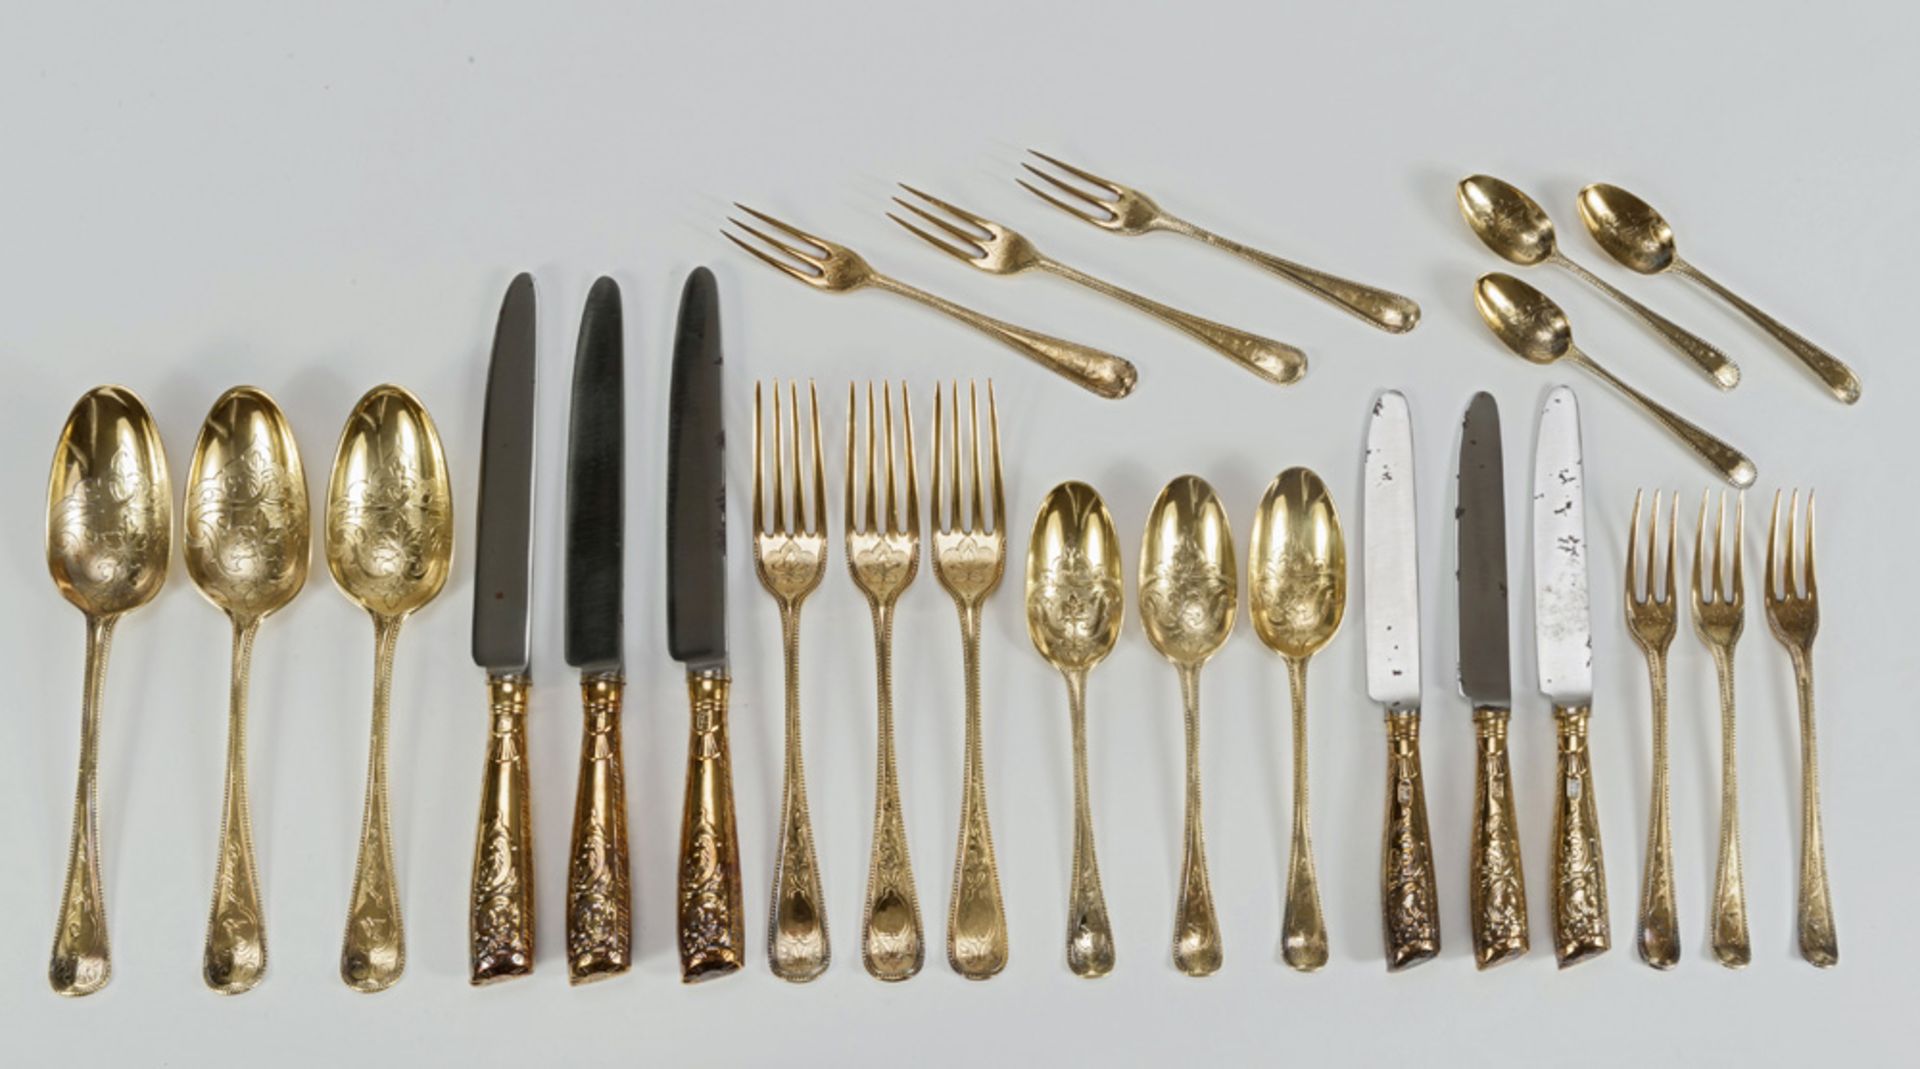 SPLENDID SET OF GILDED SILVER CUTLERY, PUNCH LONDON 1796 with elements chiseled to plant motifs.